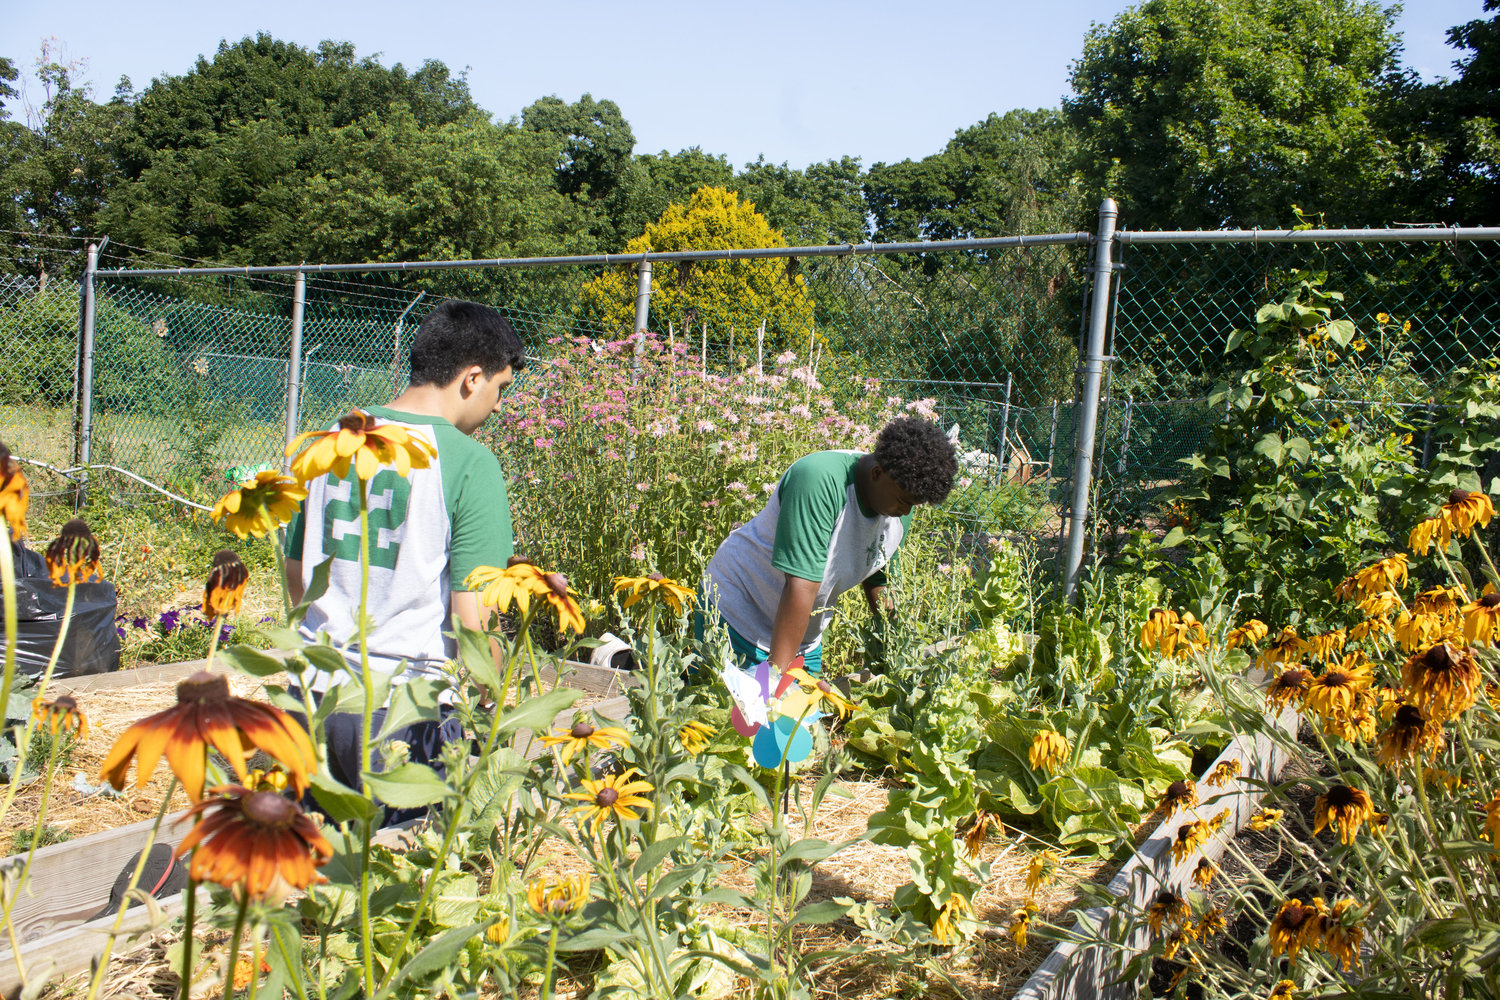 The Youth Bureau’s Green Team works on upgrading Glen Cove through beautification projects and working in the community garden.